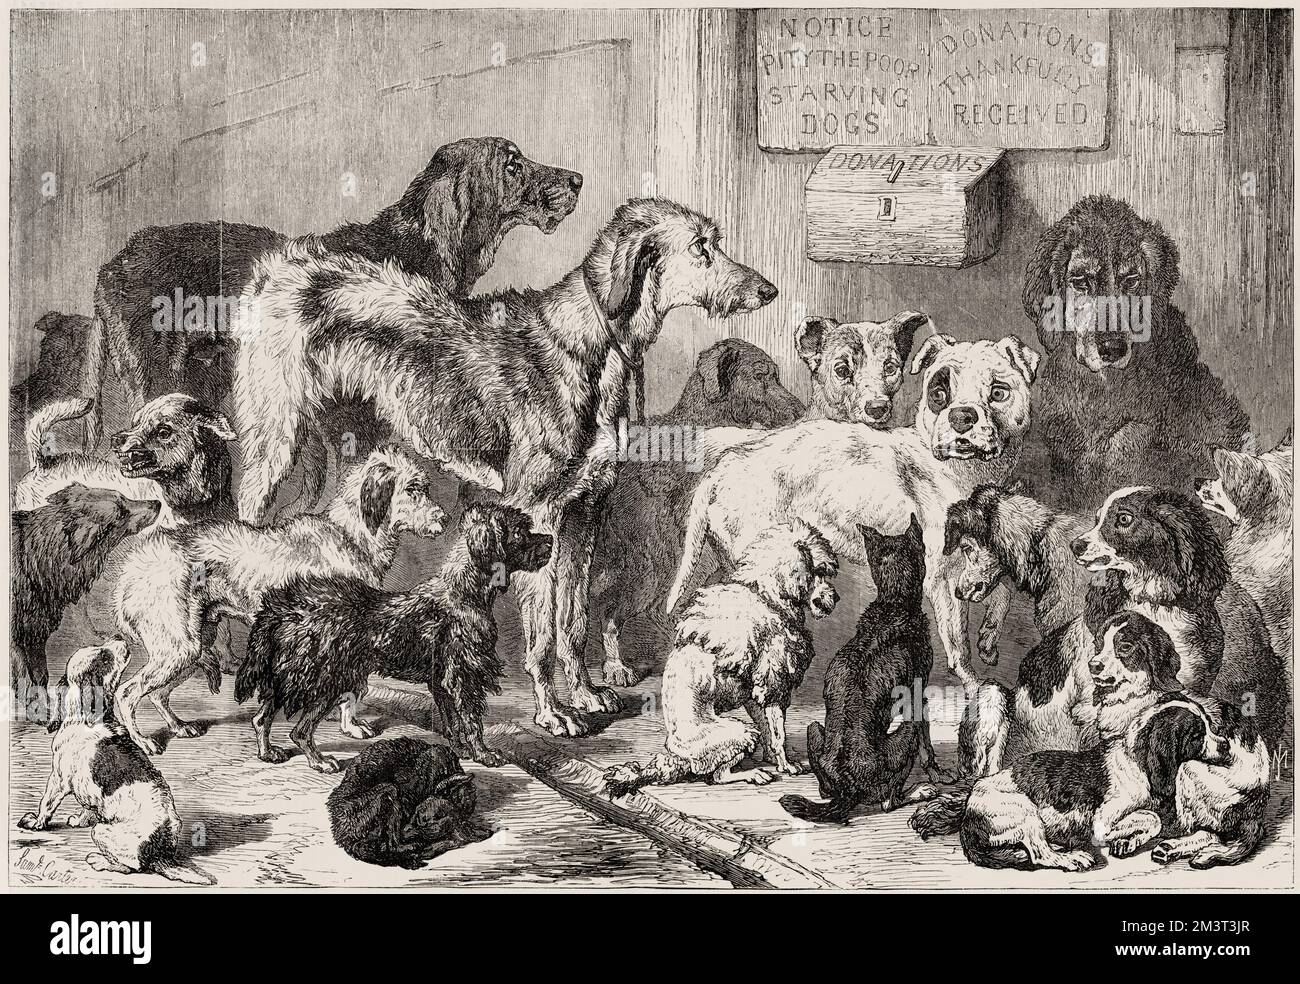 Home for lost and starving dogs, Hollingsworth Street in north London, Islington / Holloway area. This was the first iteration of Battersea Dogs' Home before it moved in 1871 to Battersea, south London. 'The Temporary Home for Lost & Starving Dogs’ as it was first known, was established in 1860 by Ms. Mary Tealby and a committee of animal lovers, in Holloway, North London. Stock Photo